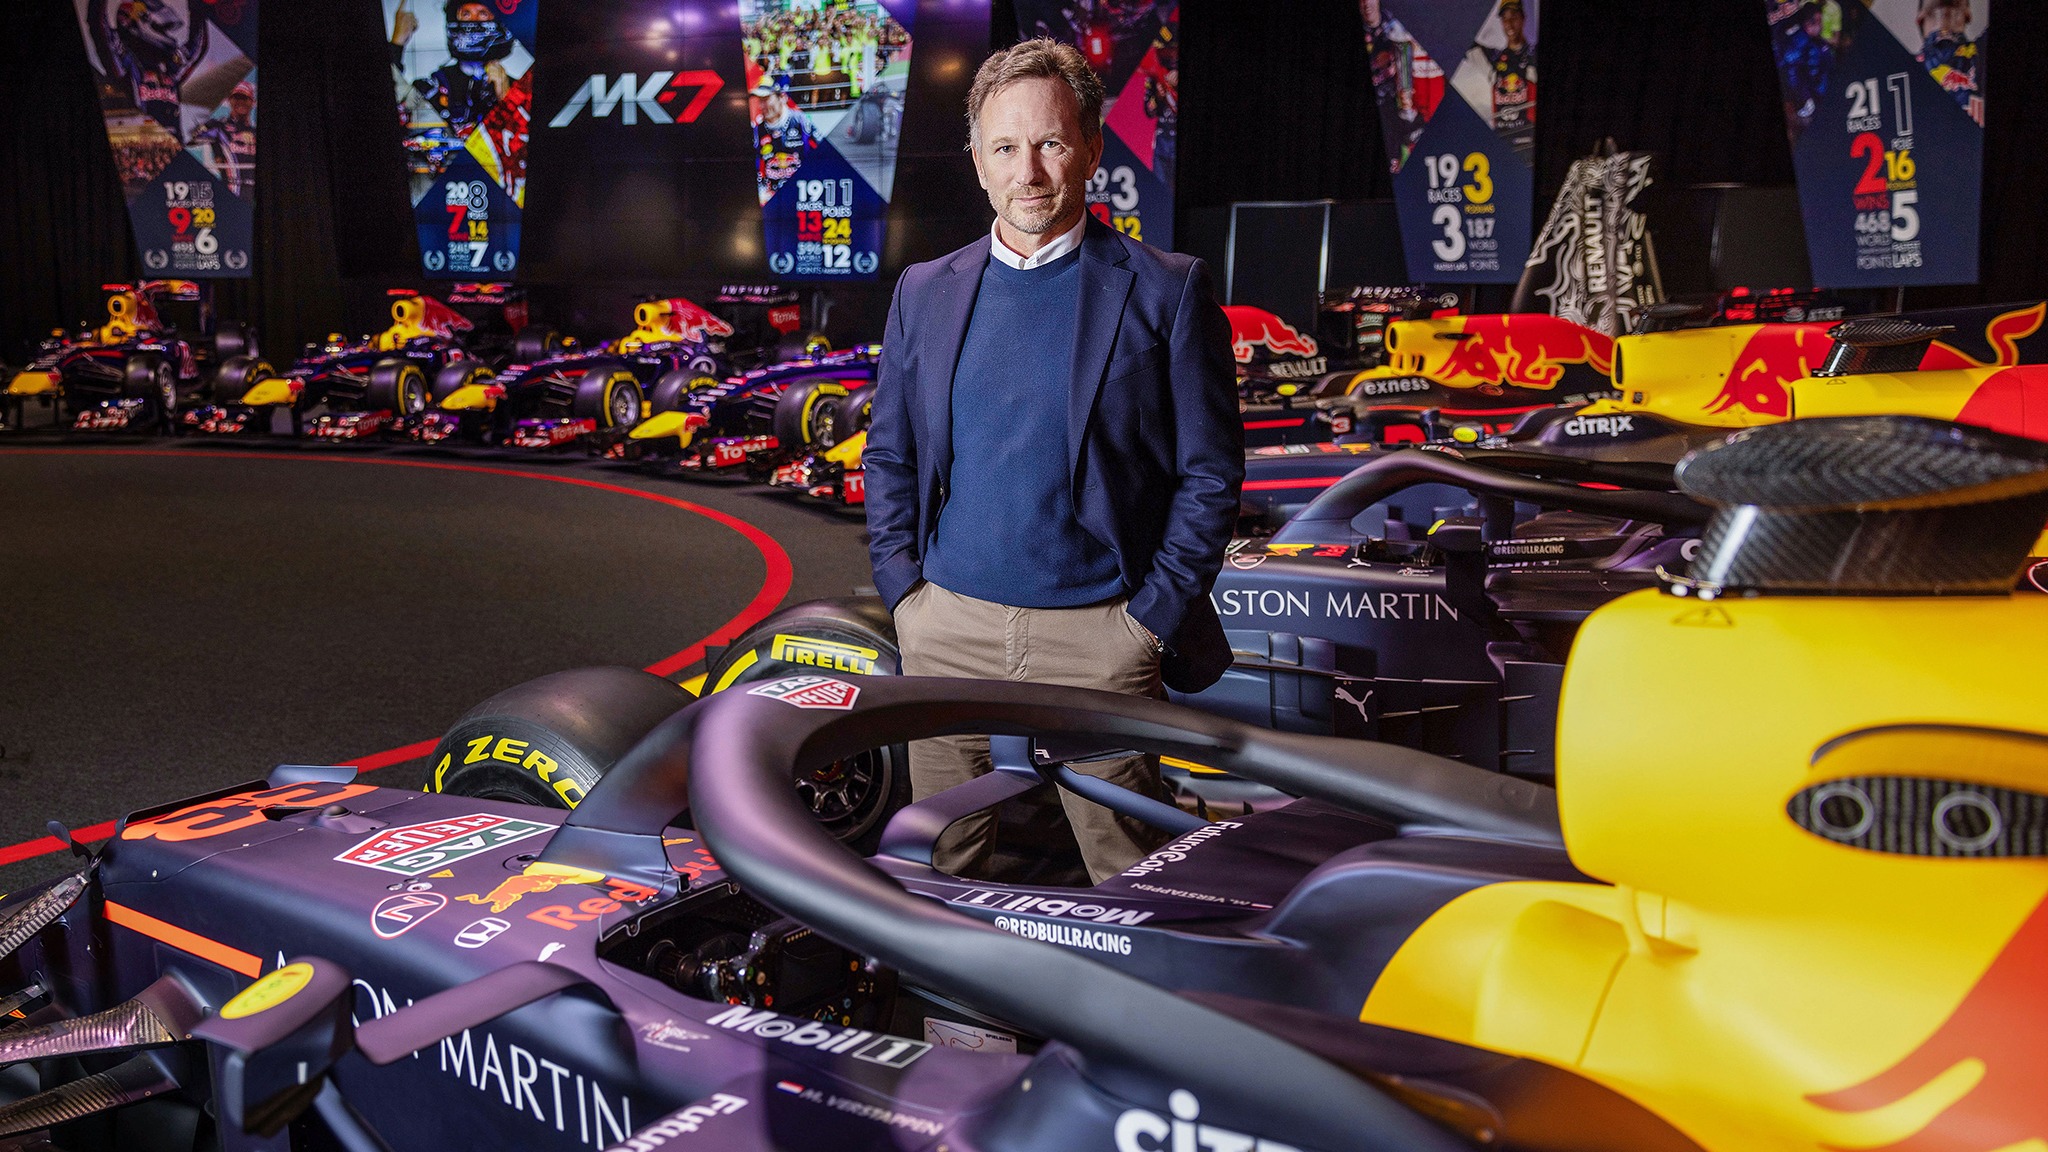 kompliceret Voksen formel Red Bull Racing's Christian Horner: 'My job is to push as hard as I can' |  Financial Times